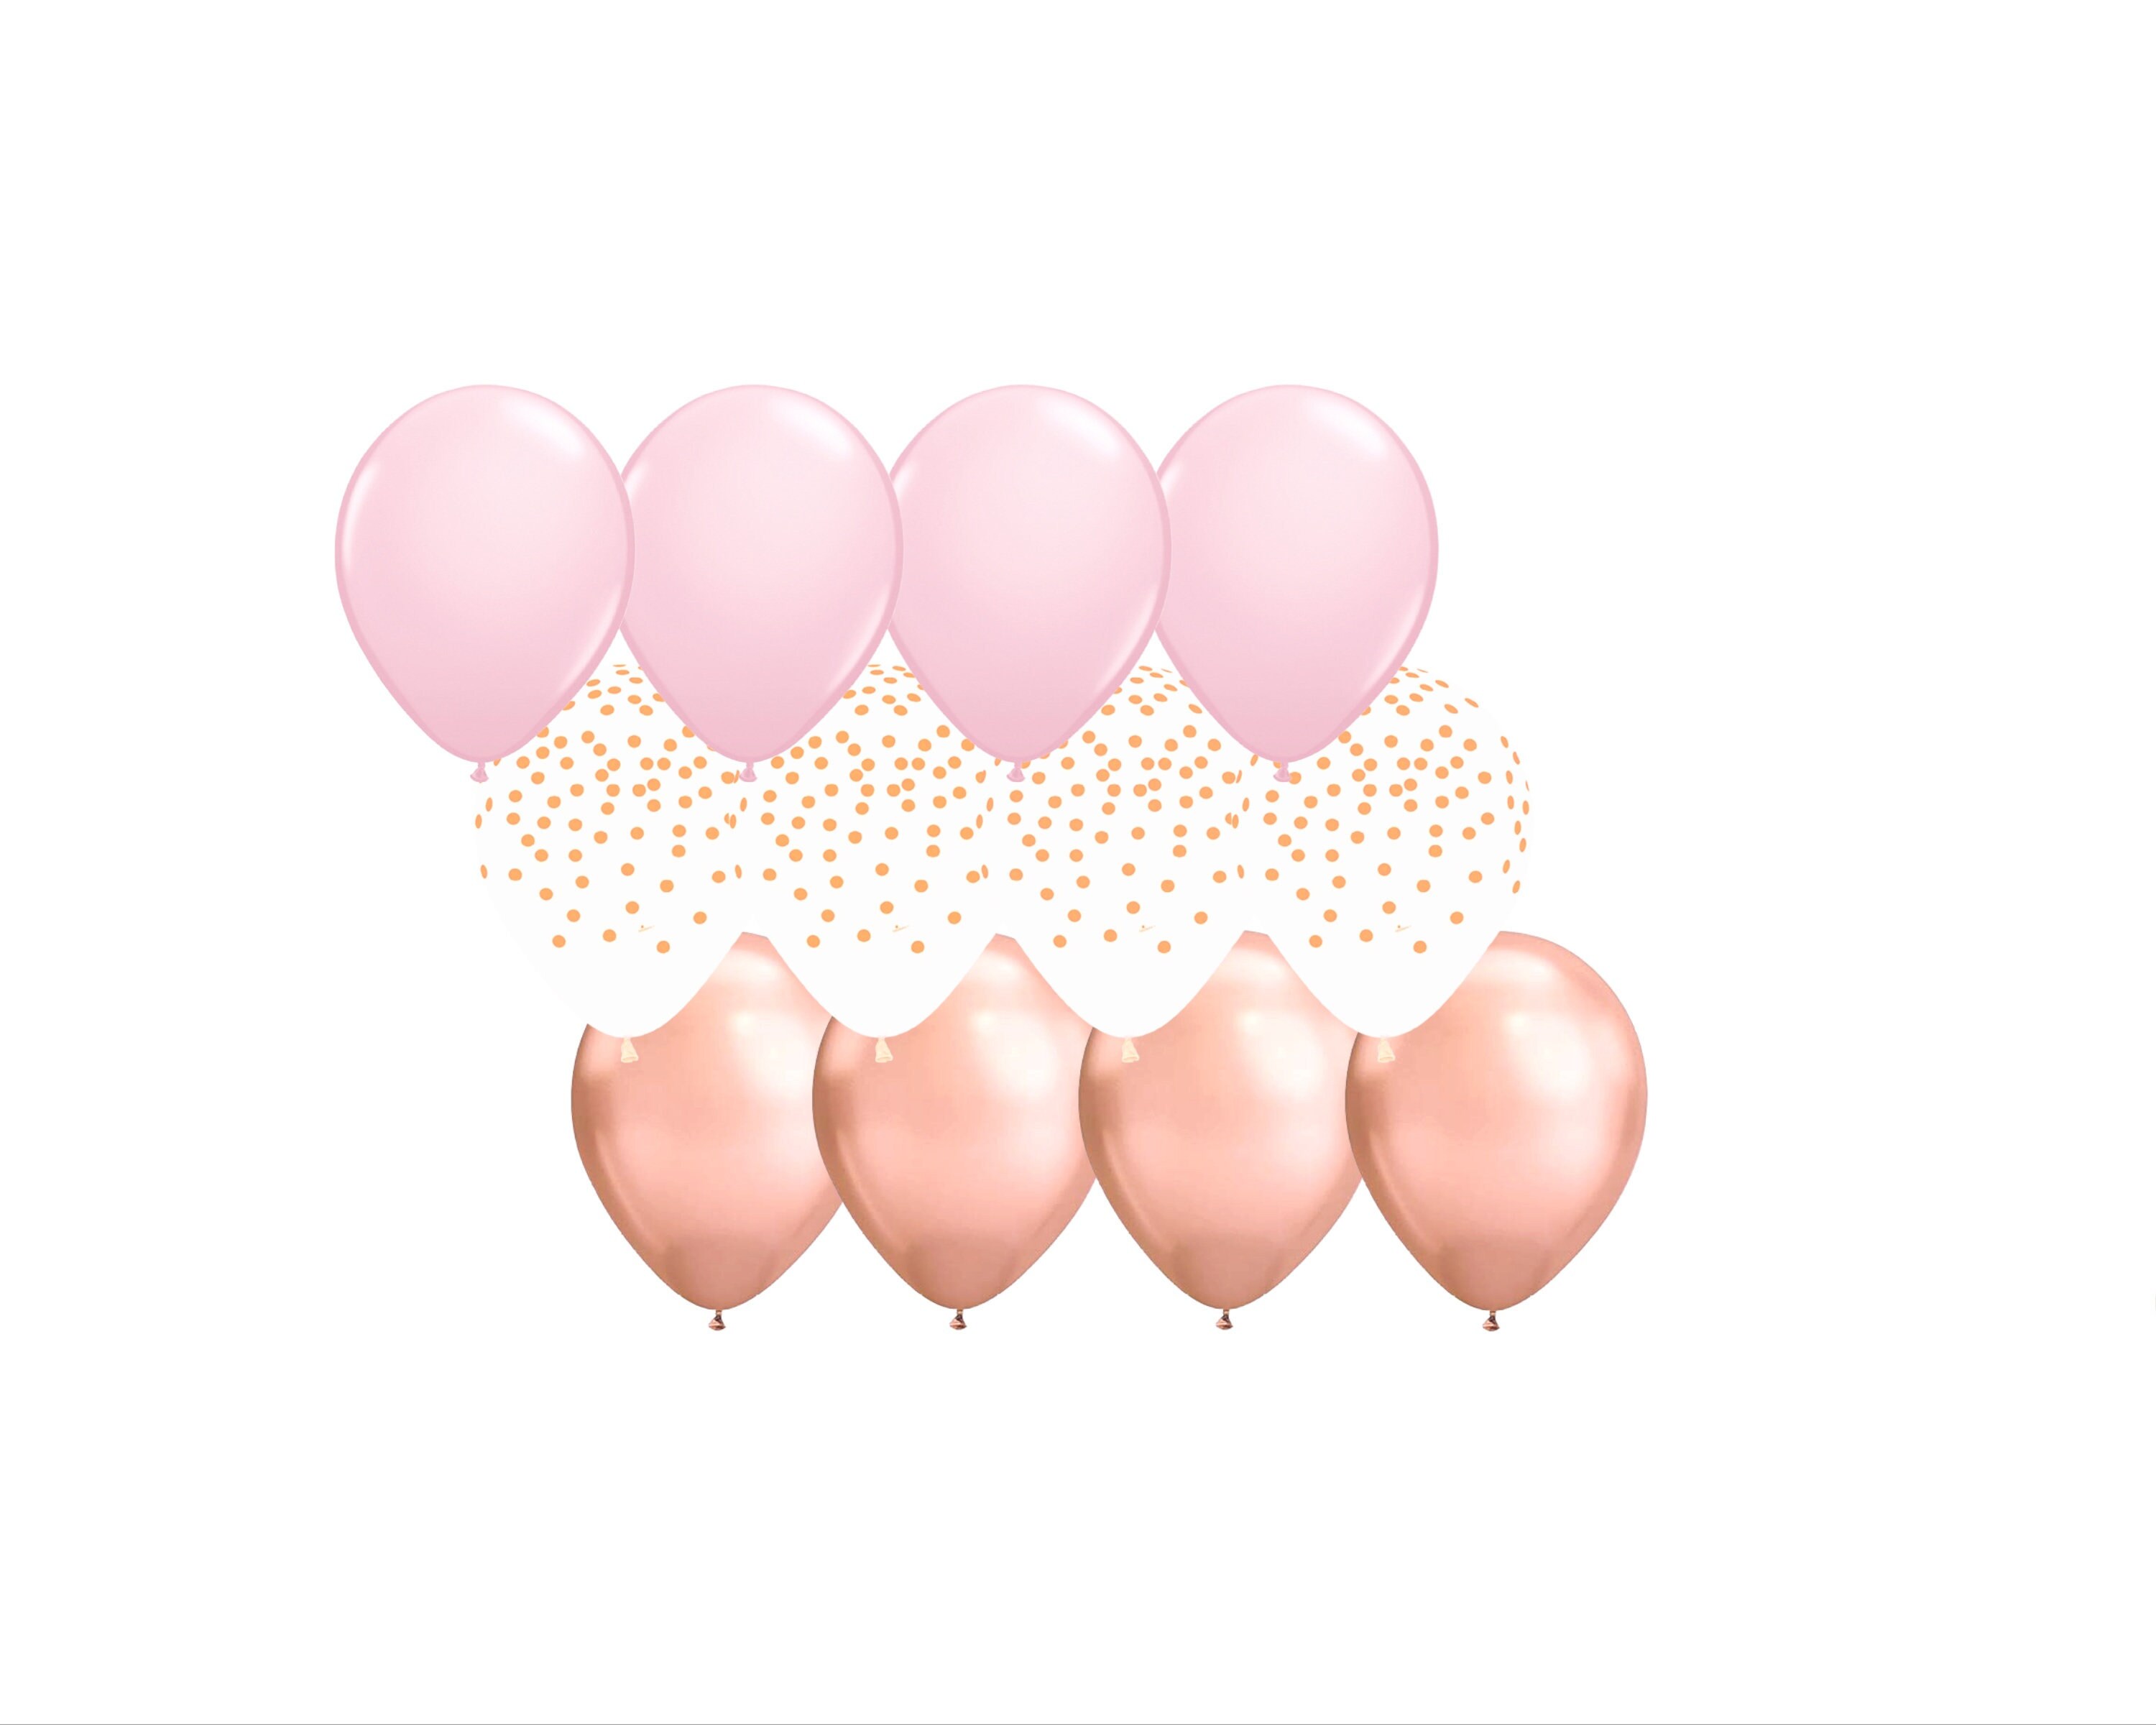 Rose Gold Glitter Balloon Towers, Bouquets and Singles Yard Card Set